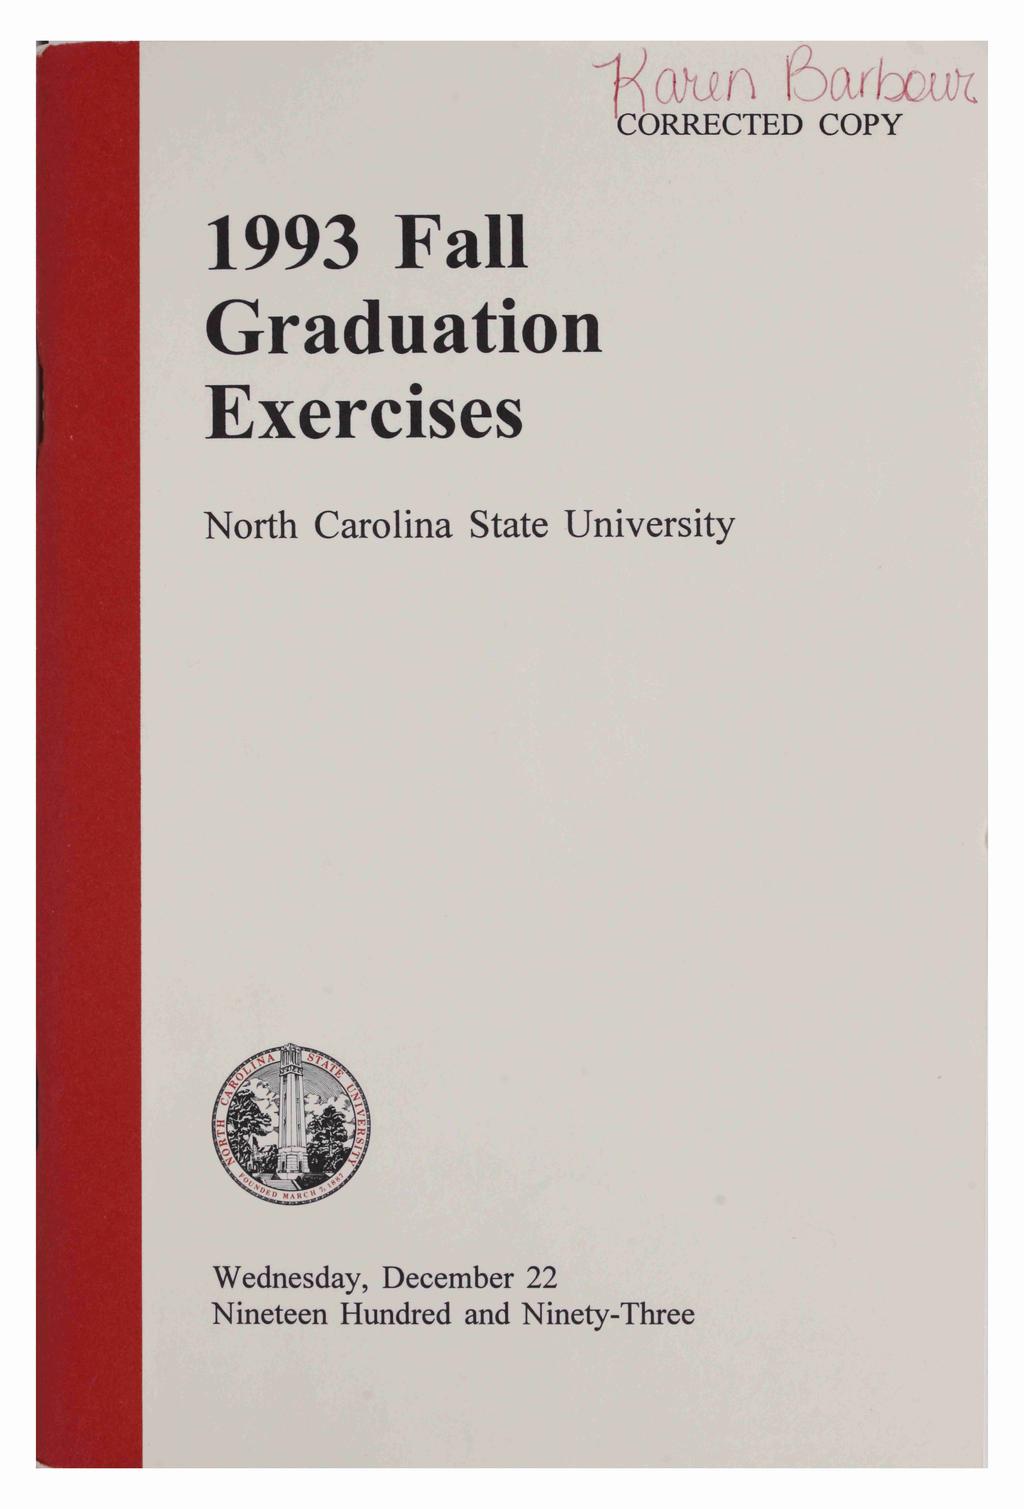 DEGREES CONFERRED Wednesday, December 22 Nineteen Hundred and Ninety-Three  This program is prepared for informational purposes only. The appearance of  - PDF Free Download